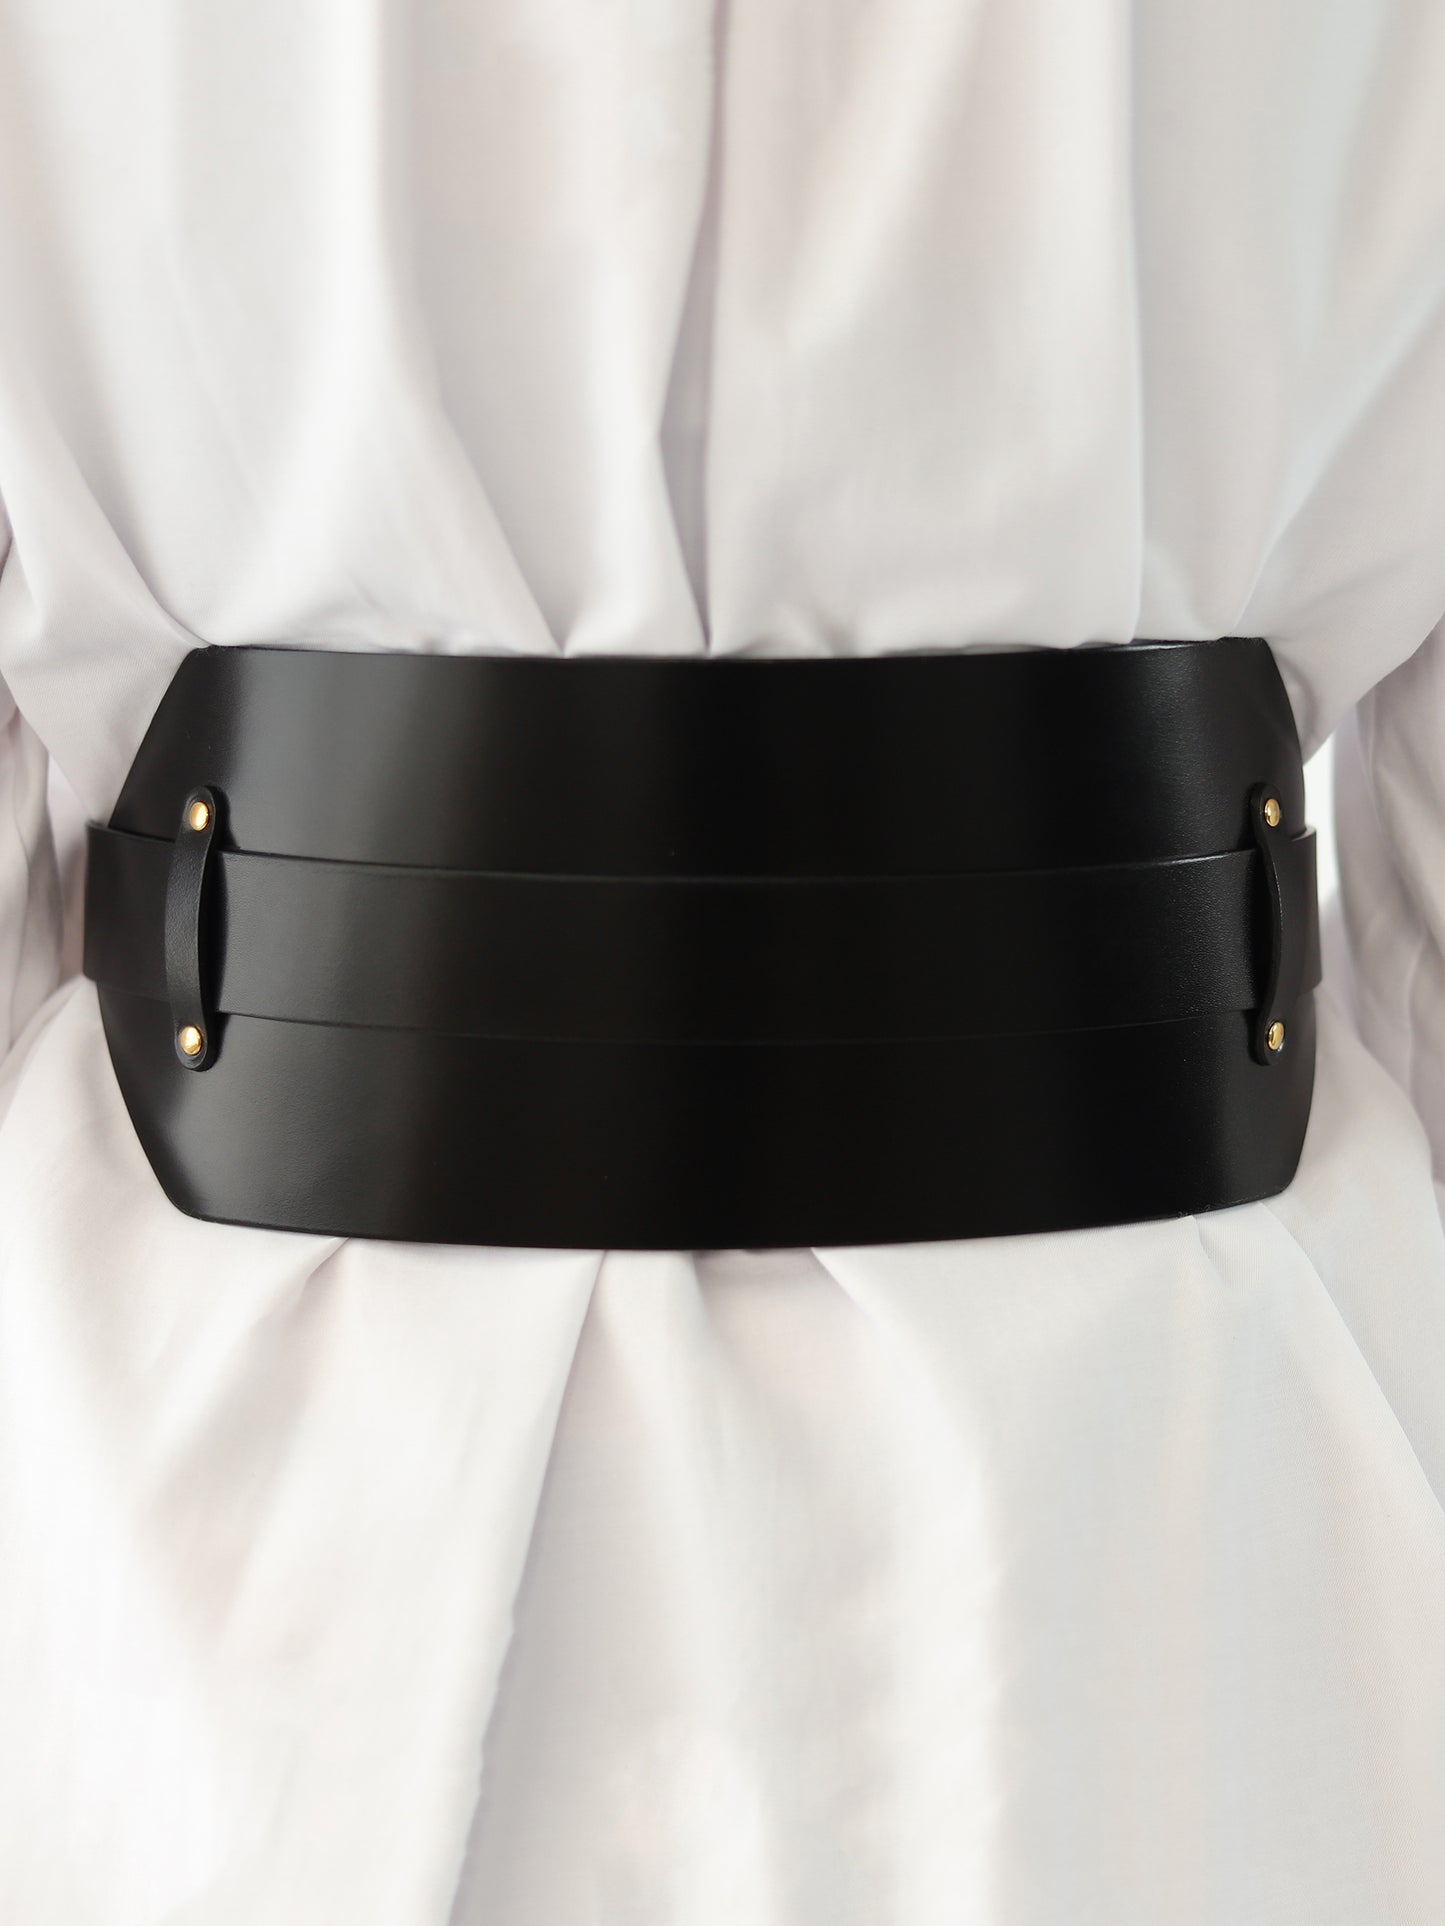 Back view of the wide leather belt.